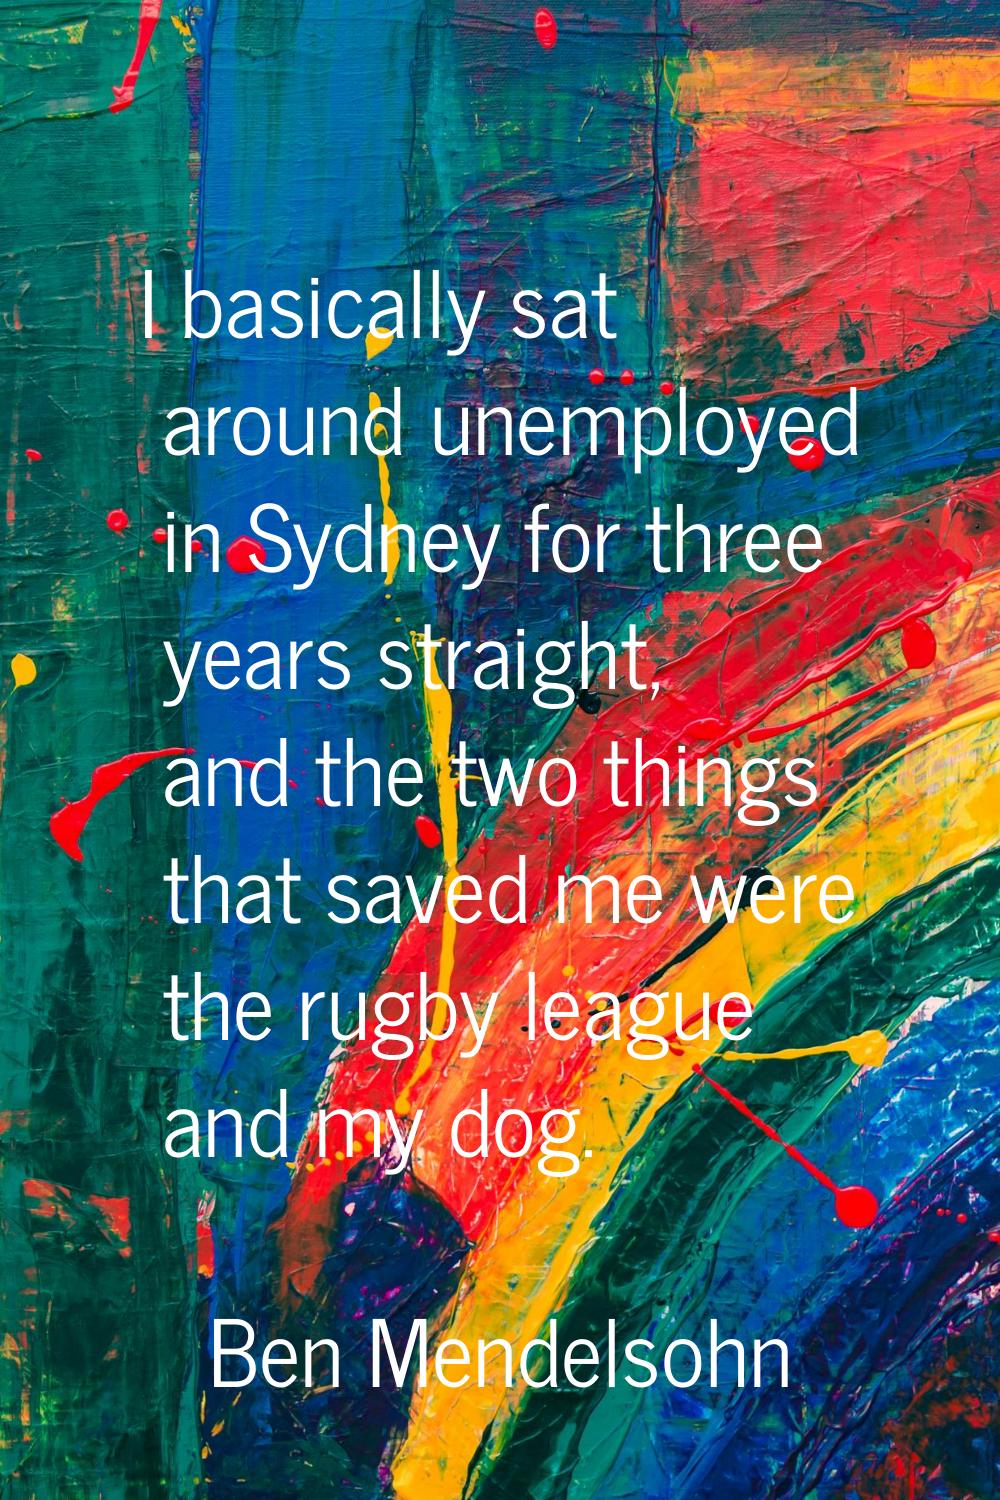 I basically sat around unemployed in Sydney for three years straight, and the two things that saved